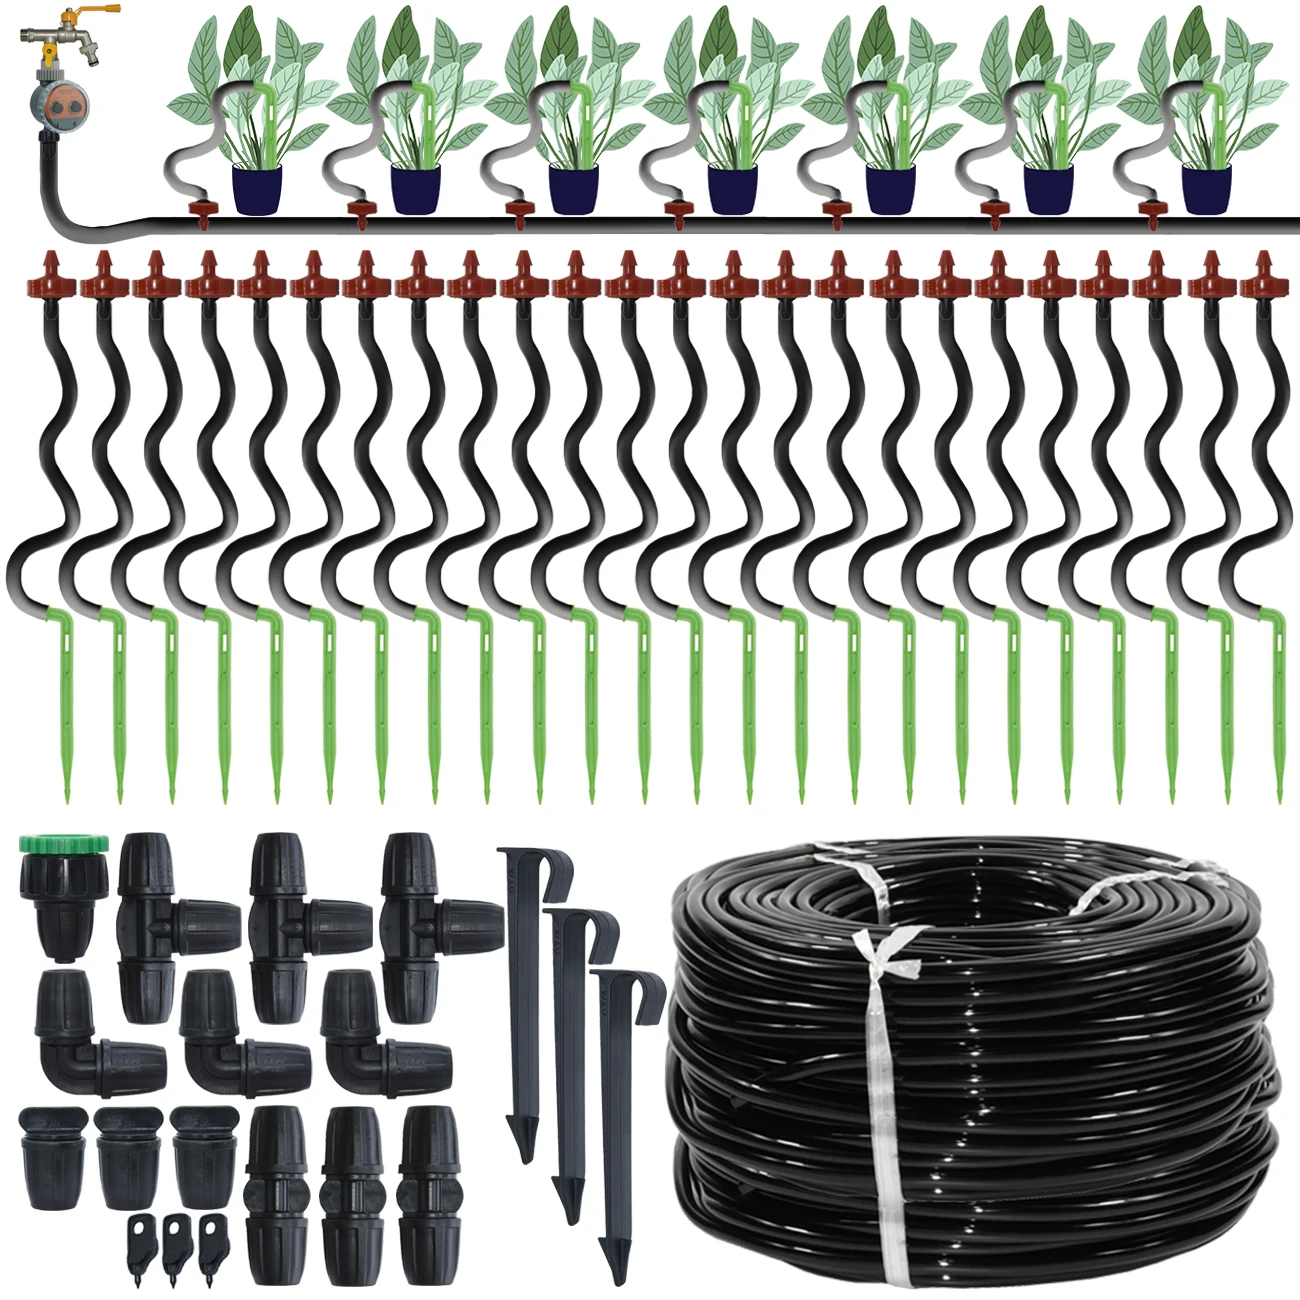 

KESLA Garden 2L/H Drip Irrigation Watering Saving System Kit Bend Arrow Drippers 3/5mm Hose for Plant Potted Bonsai Greenhouse